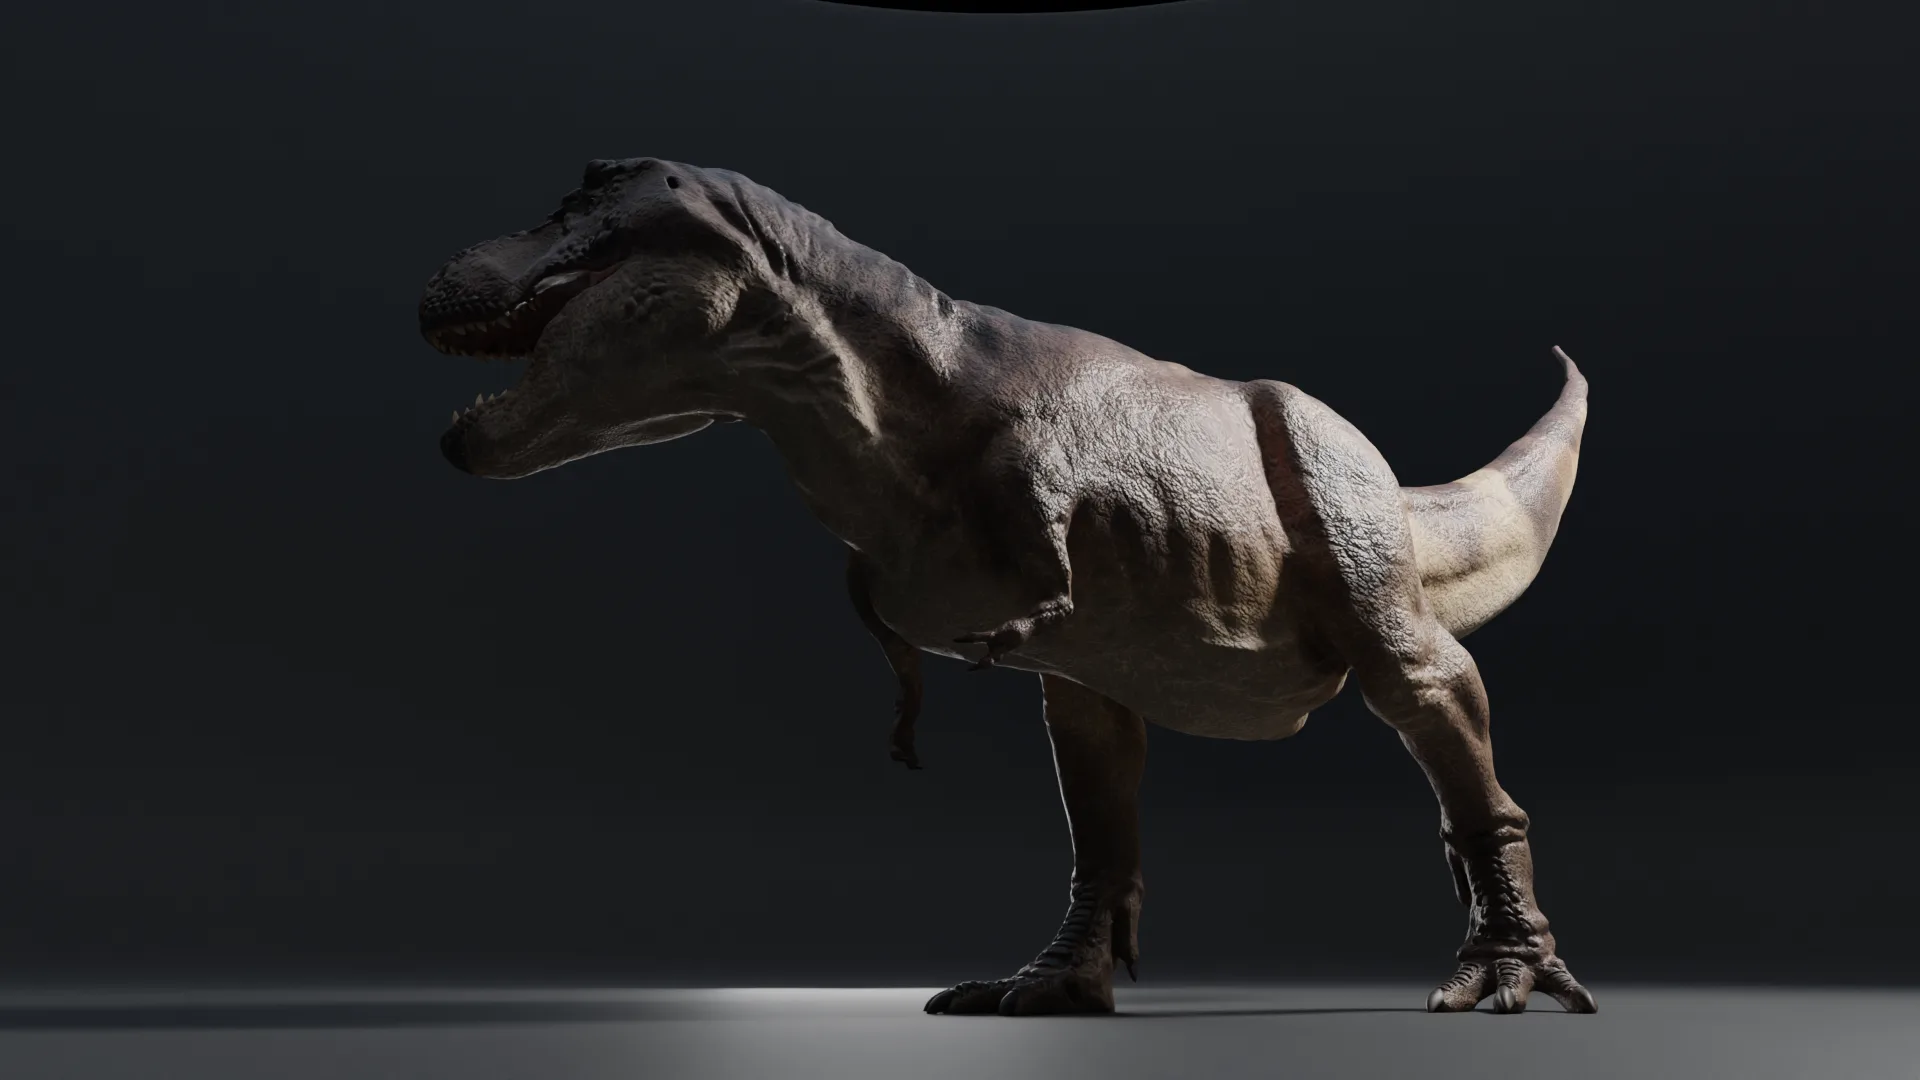 Production Ready T-Rex In Blender